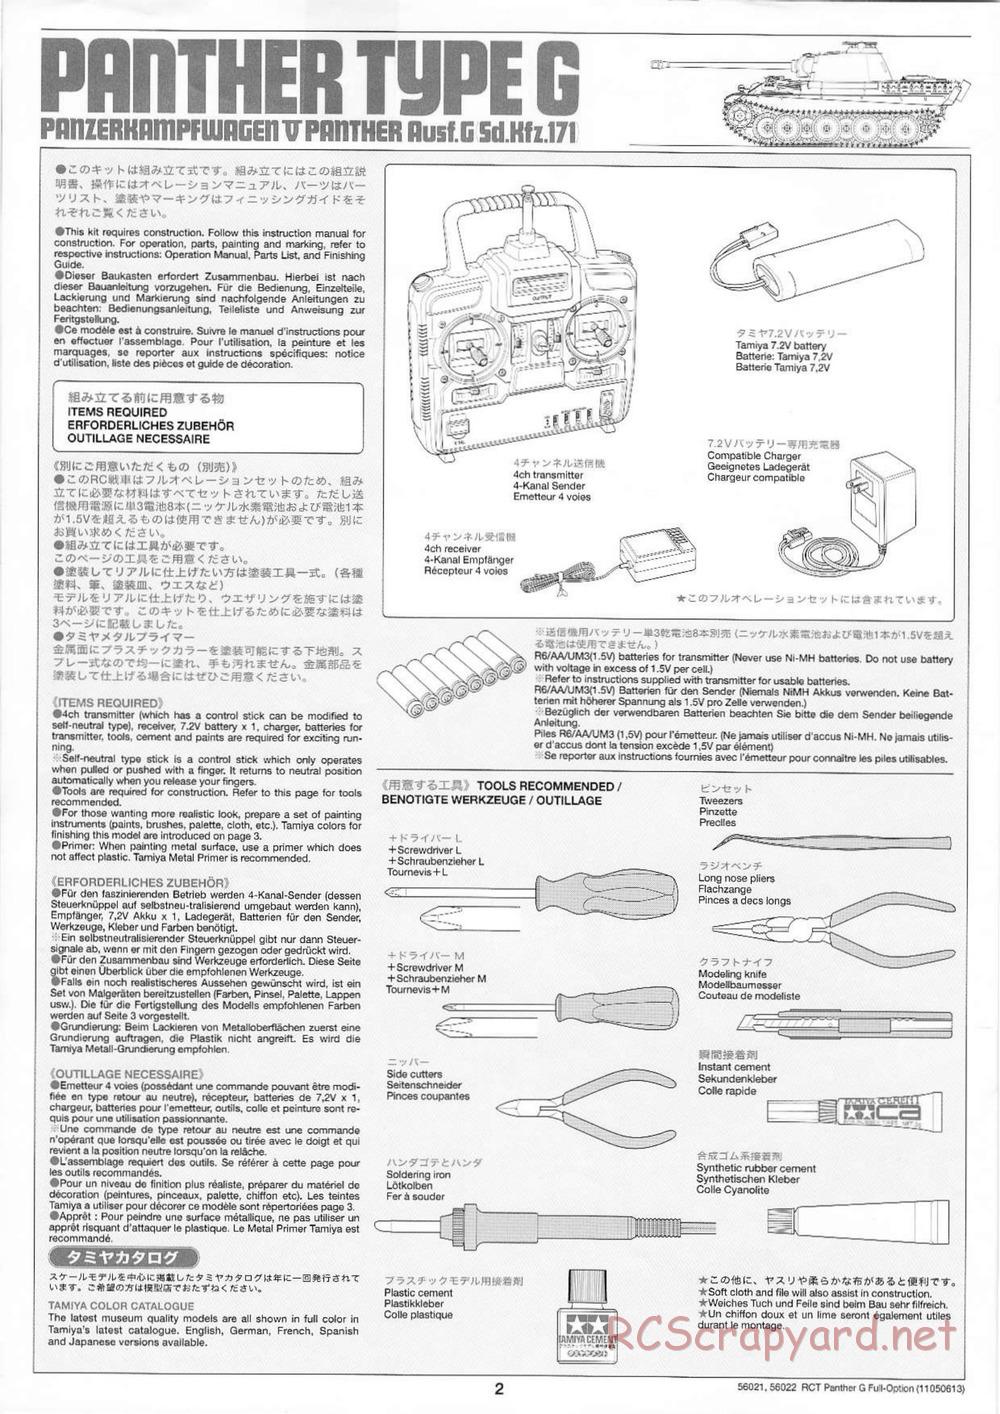 Tamiya - Panther Type G - 1/16 Scale Chassis - Manual - Page 2